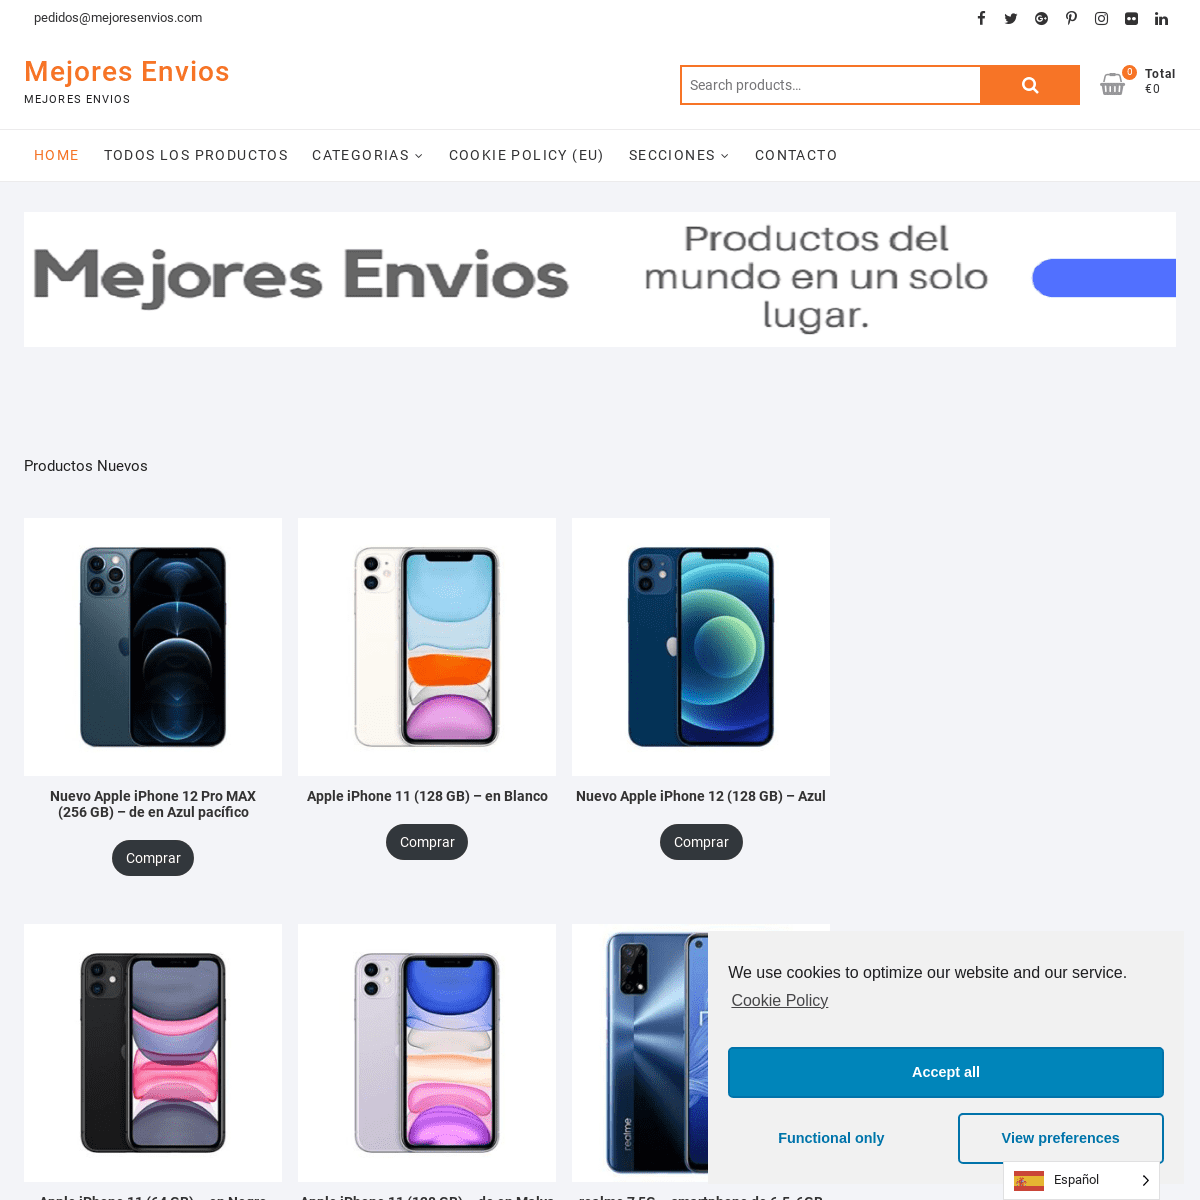 A complete backup of https://mejoresenvios.com